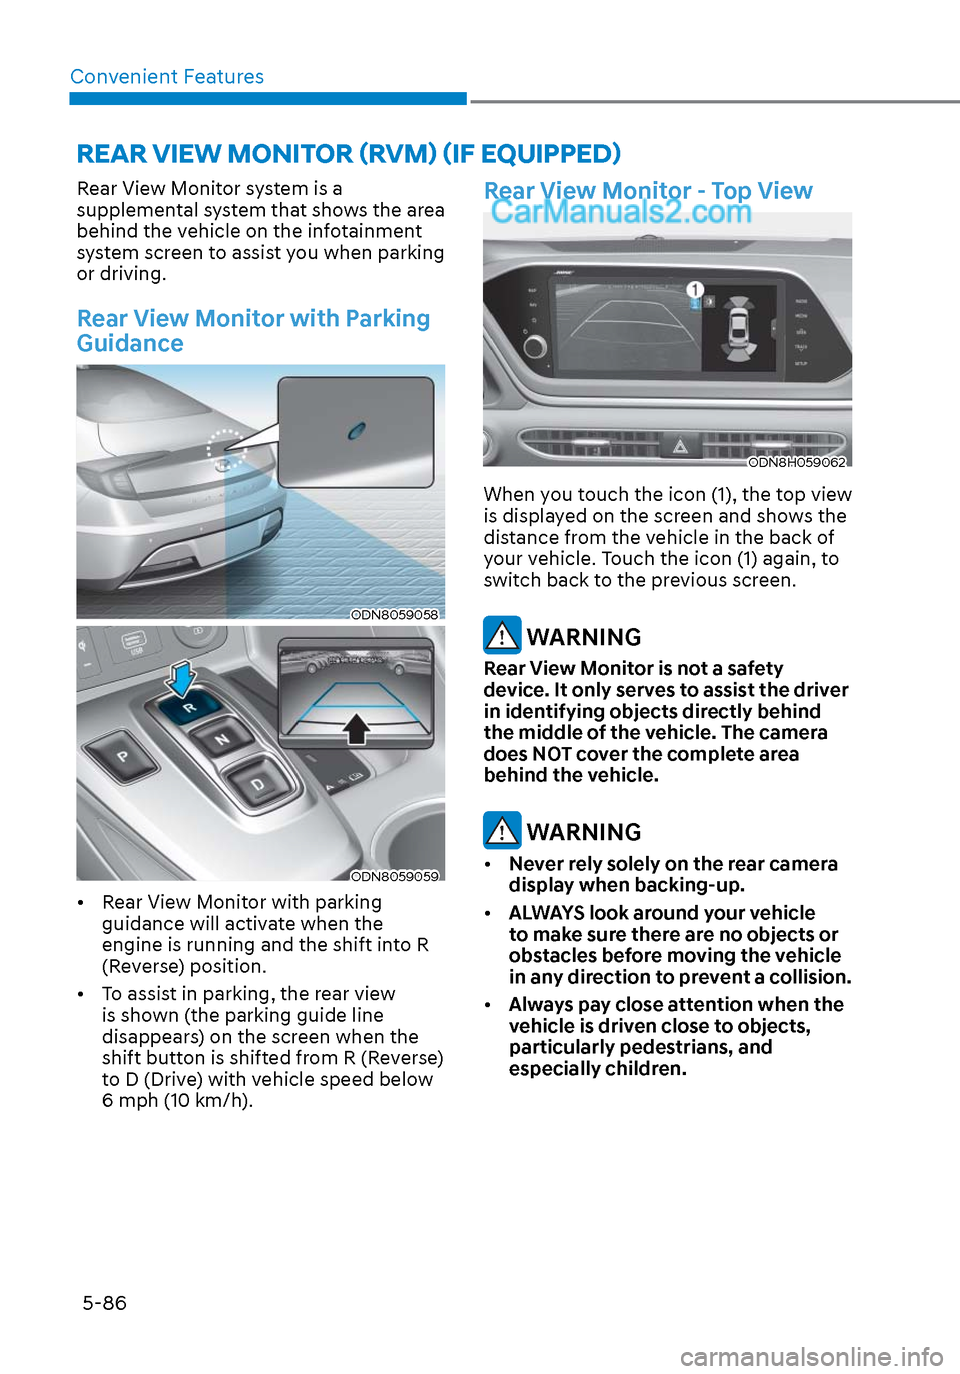 Hyundai Sonata 2020 Owners Guide Convenient Features5-86
Rear View Monitor system is a 
supplemental system that shows the area 
behind the vehicle on the infotainment 
system screen to assist you when parking 
or driving.
Rear View 